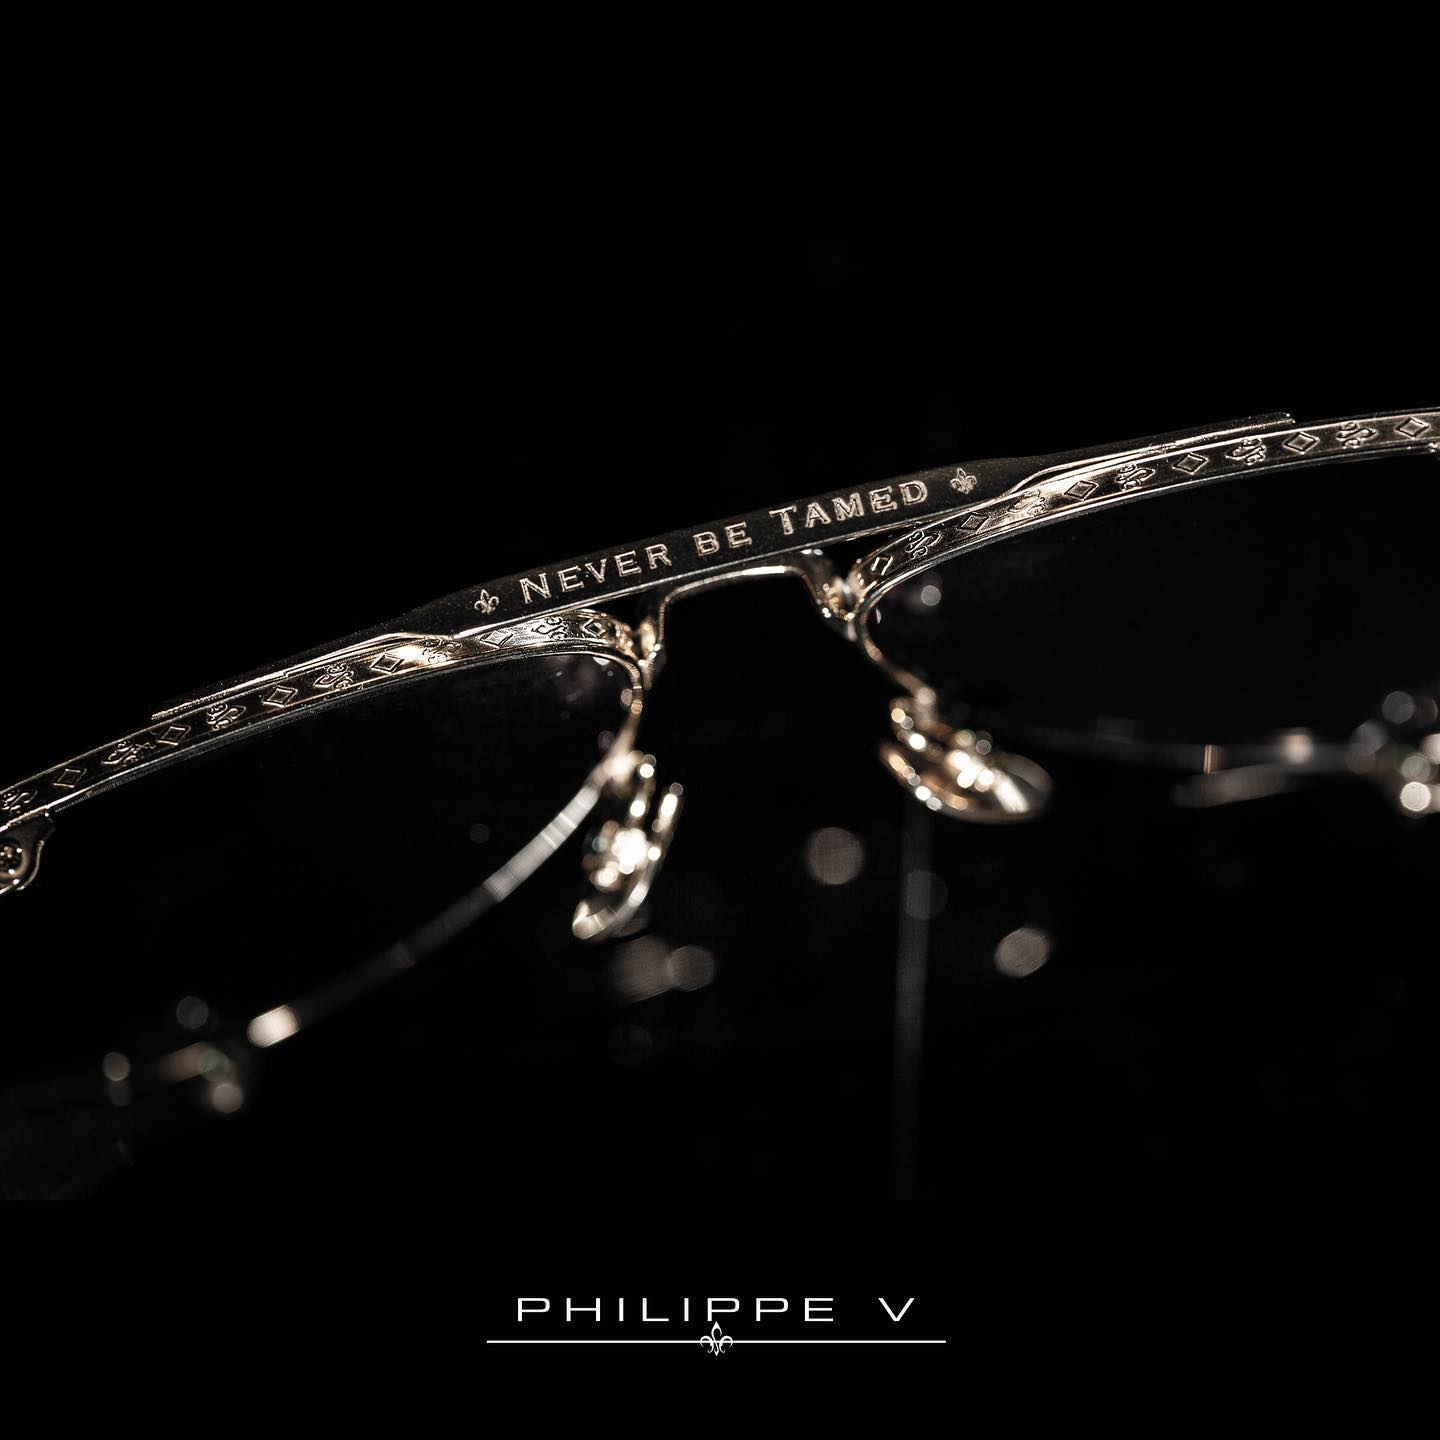 Philippe V graved-in details of the frame